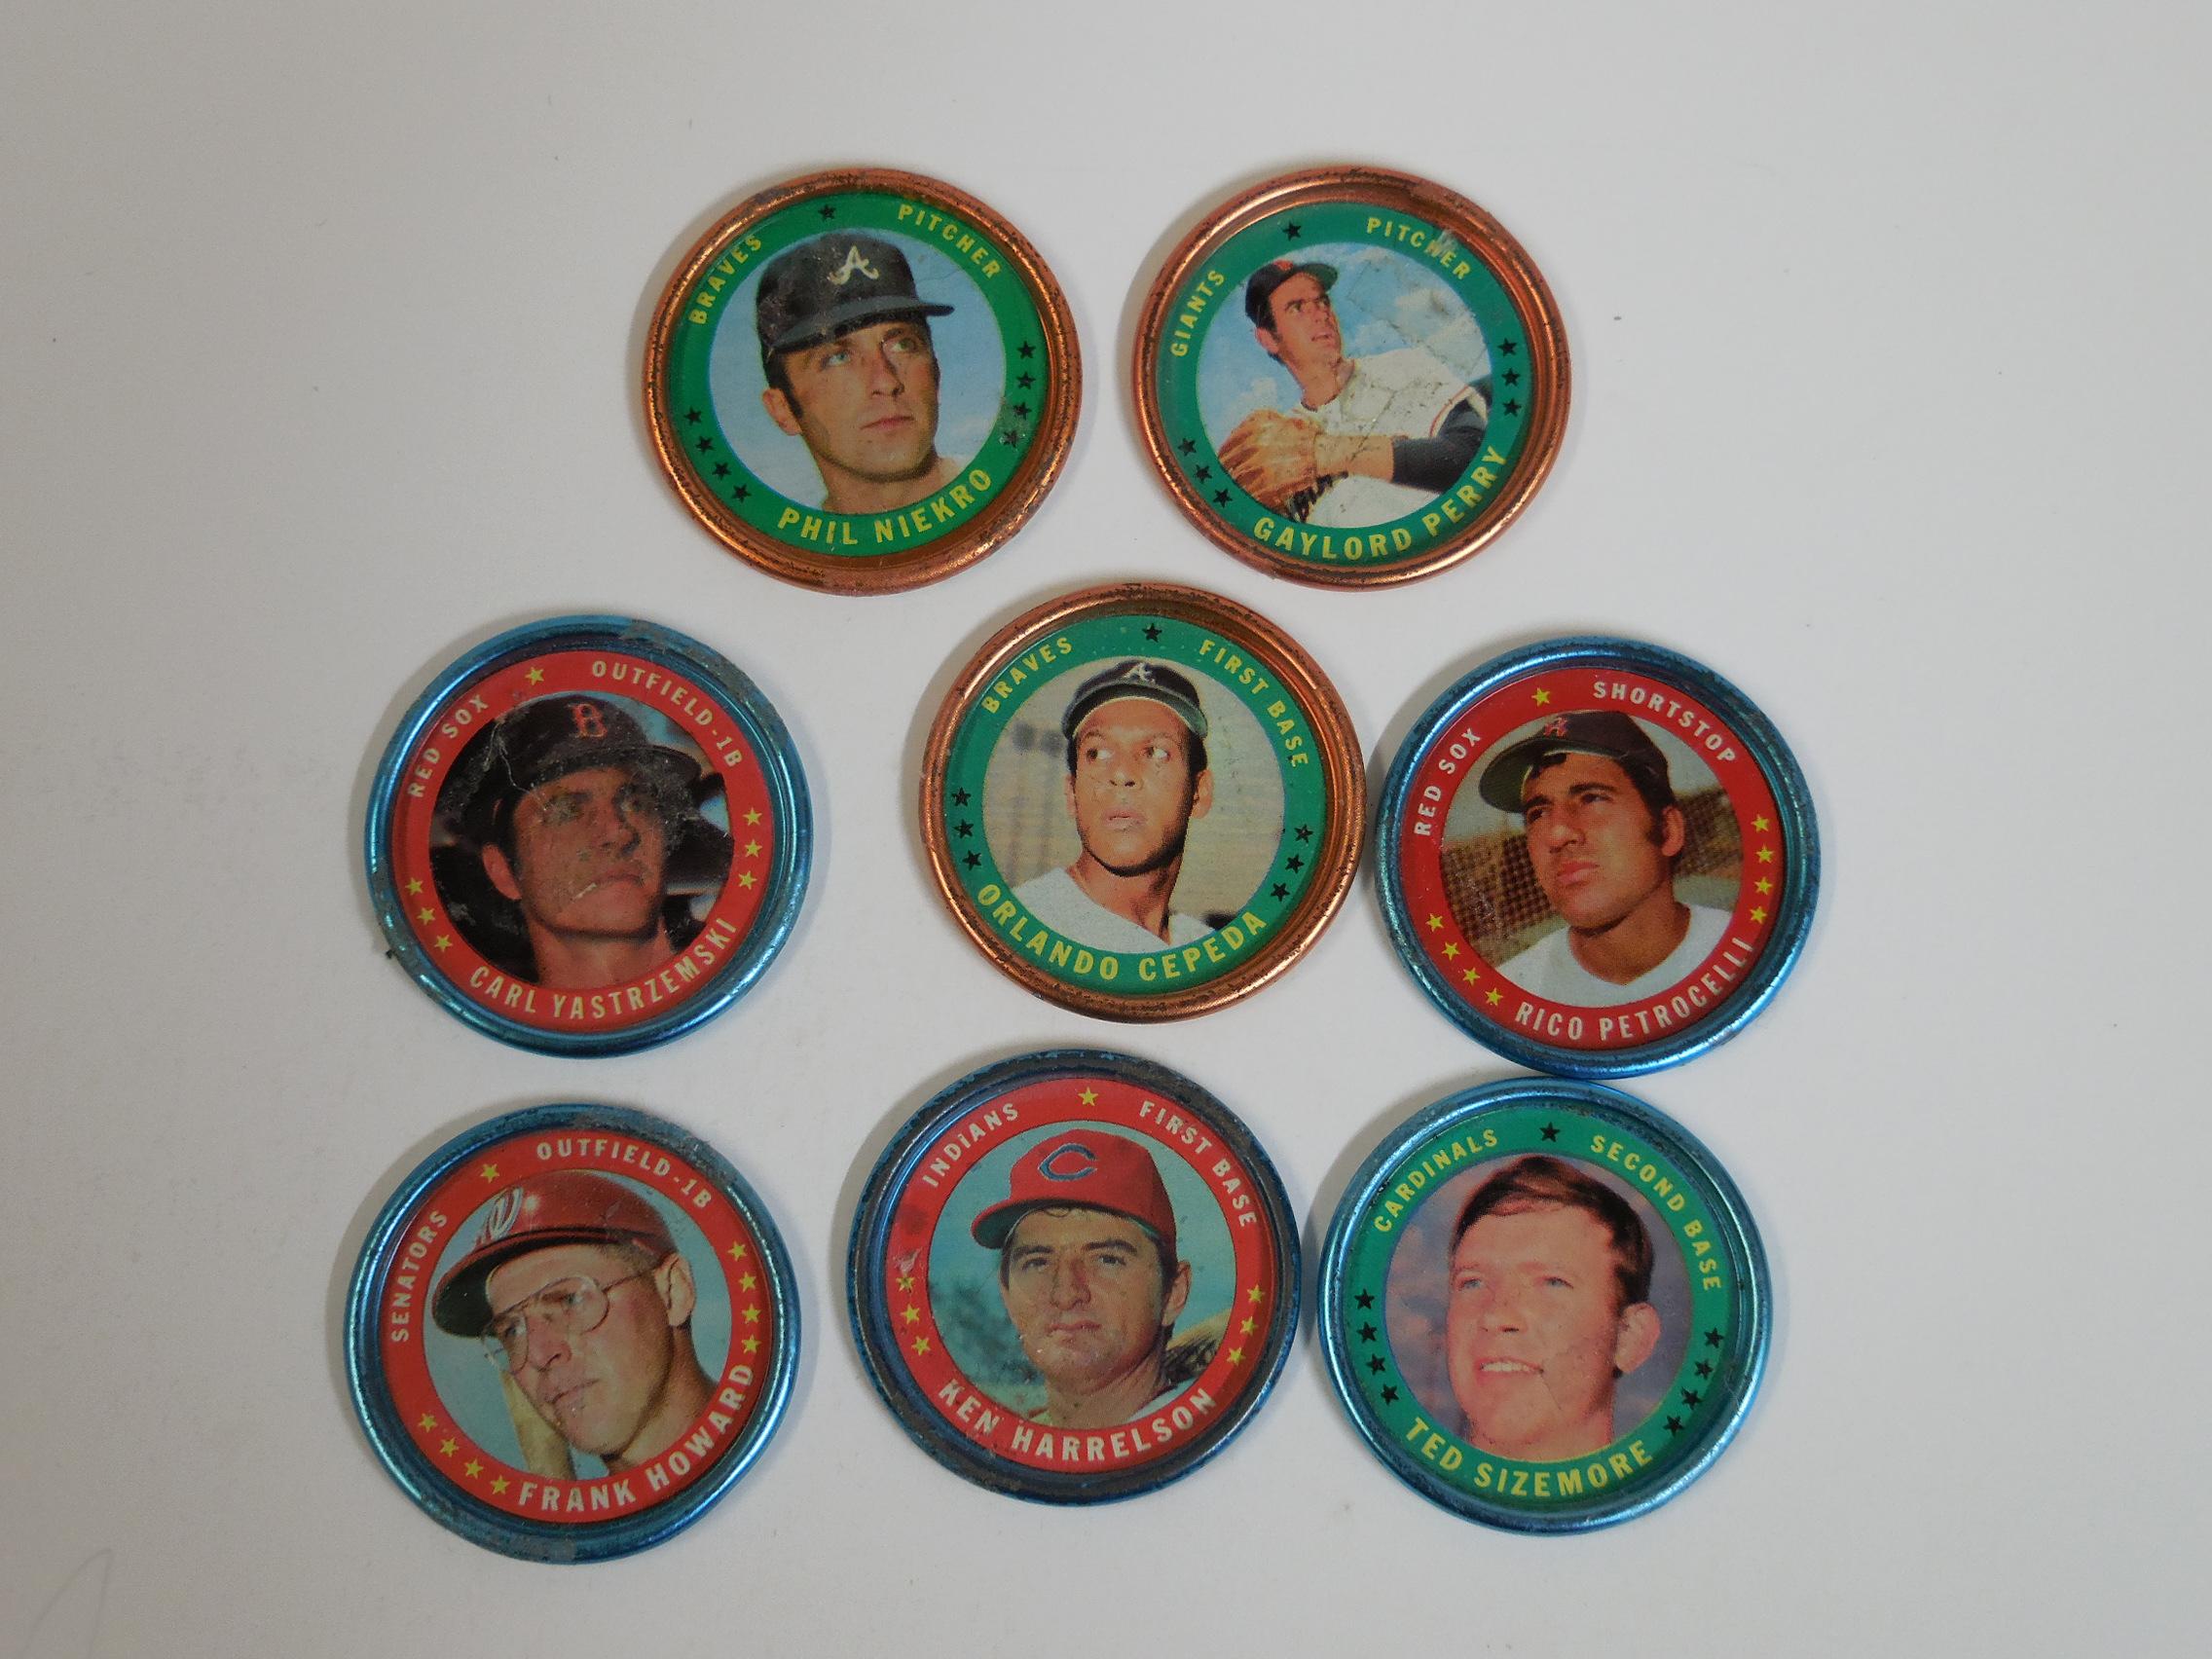 LARGE 1971 TOPPS BASEBALL COINS LOT WITH SOME STARS